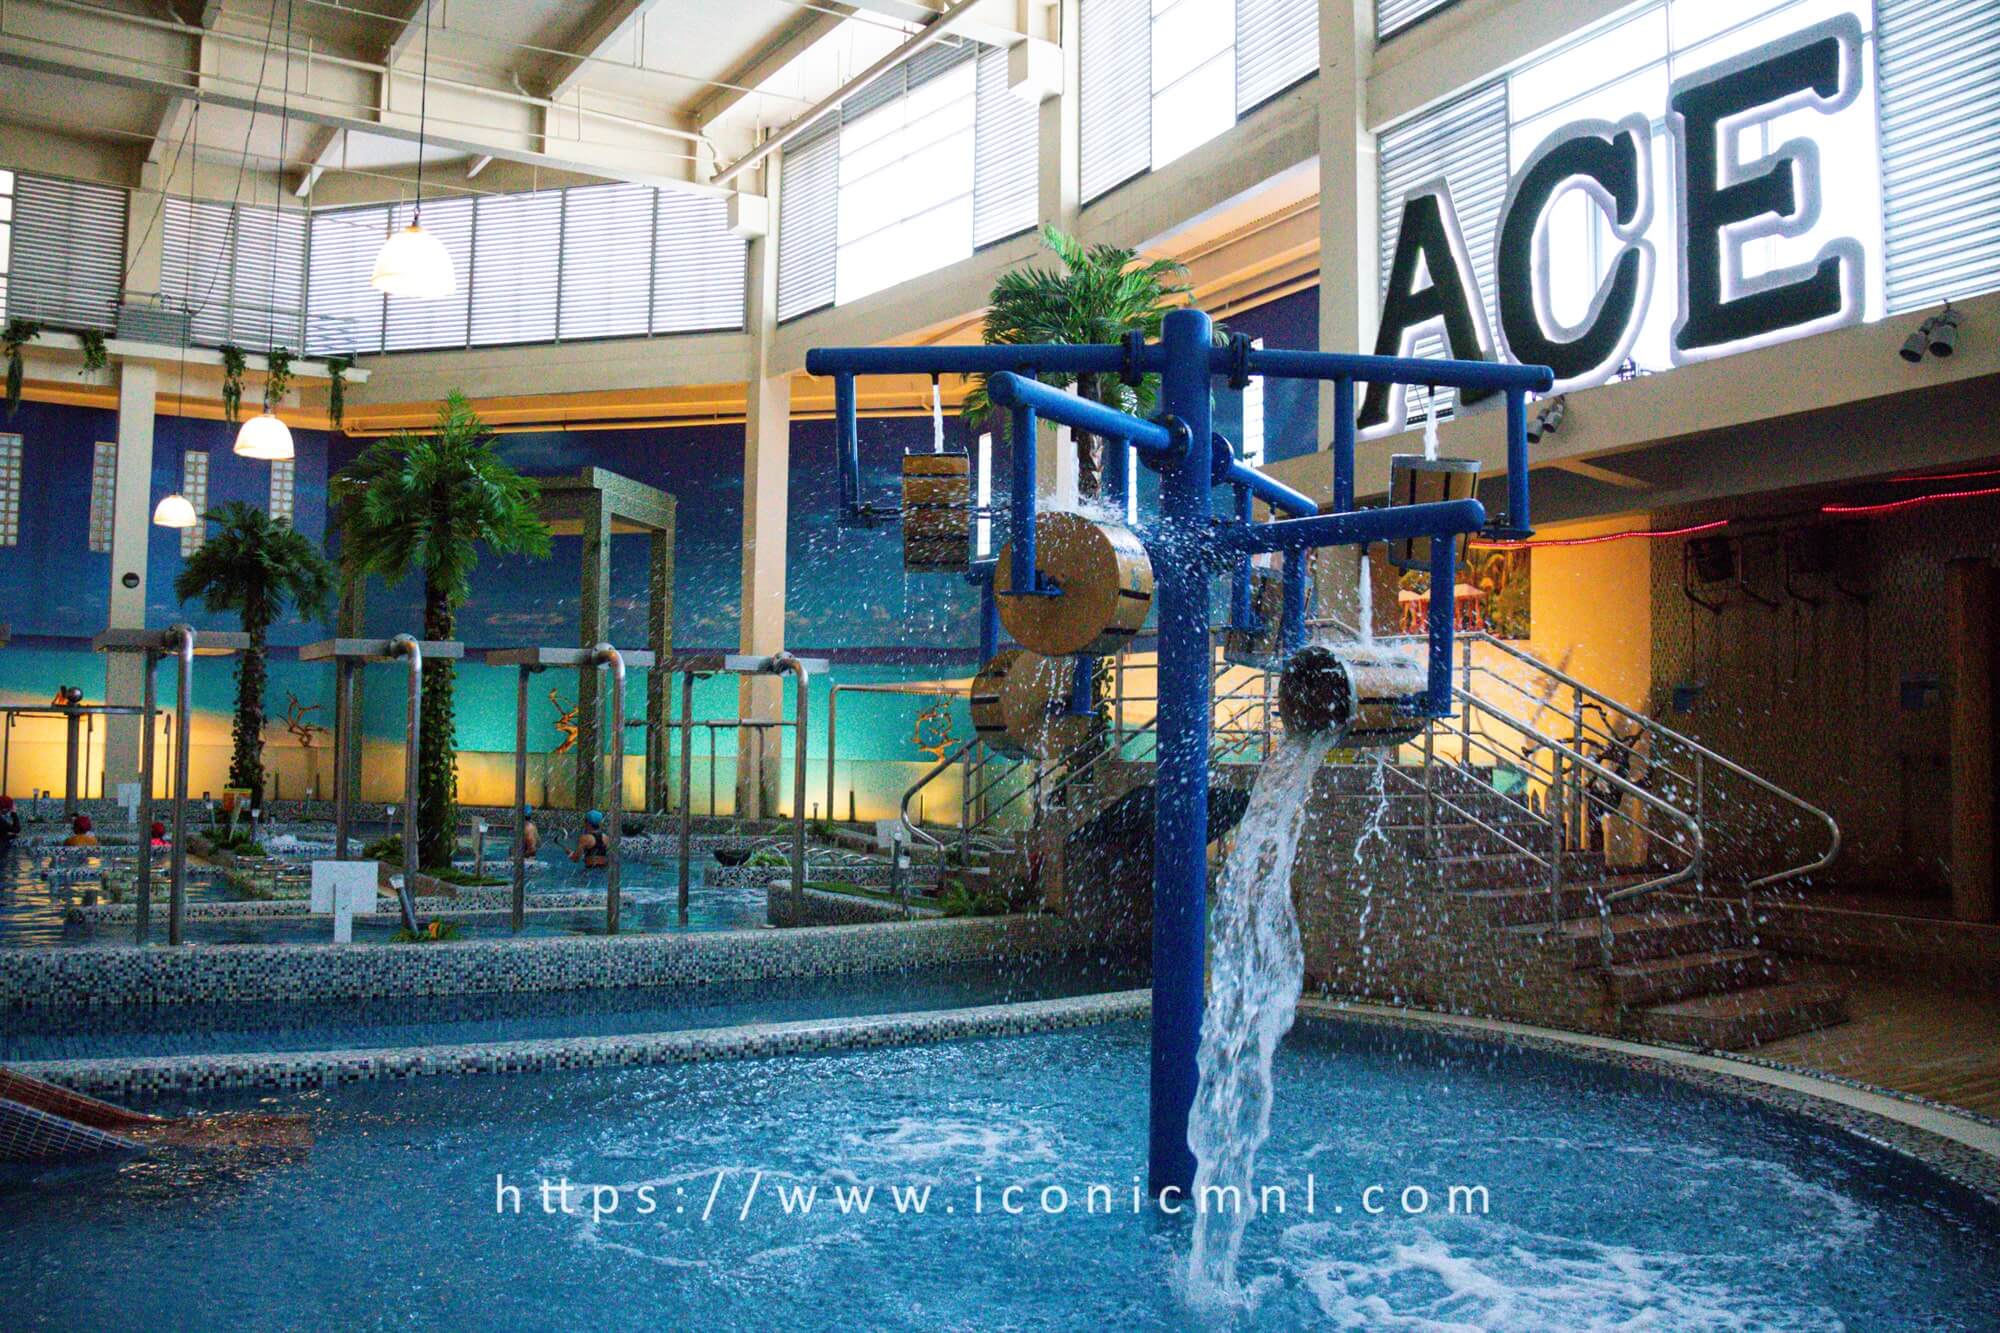 ACE Water SPA - Kid’s Area